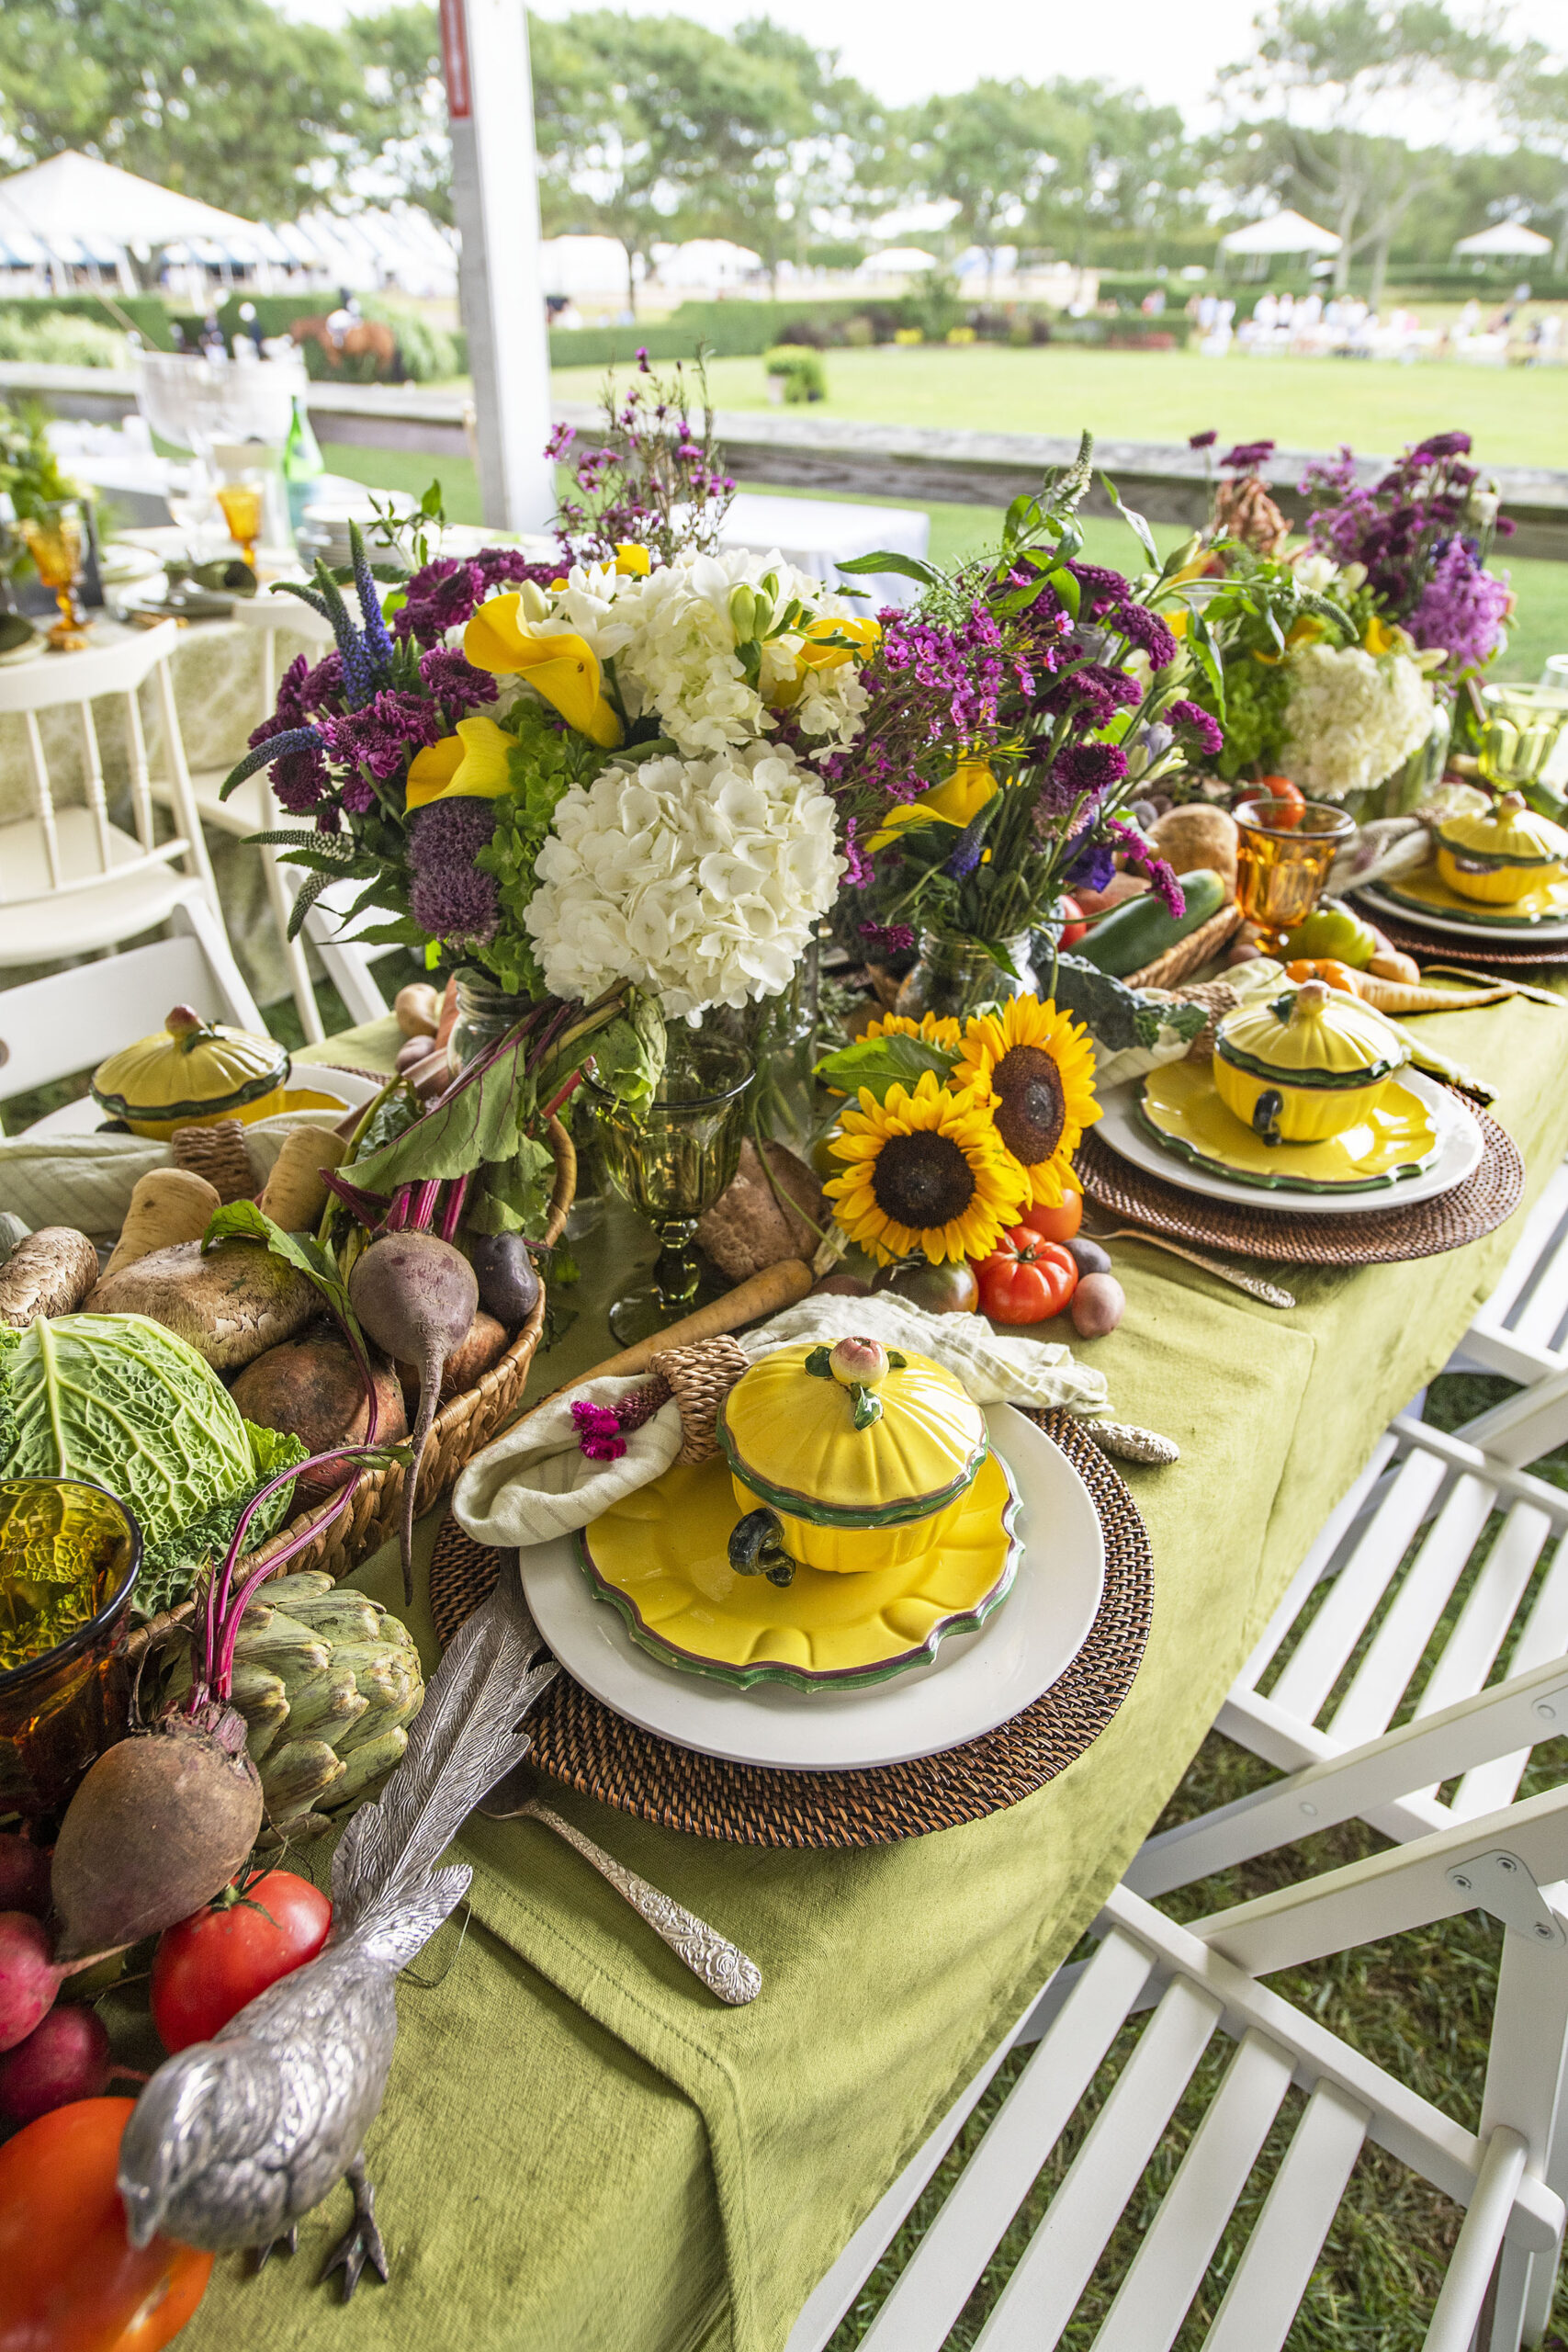 The table setting for the Buxton Farm table in the VIP tent at the 2021 Hampton Classic on Grand Prix Sunday, September 5th, 2021